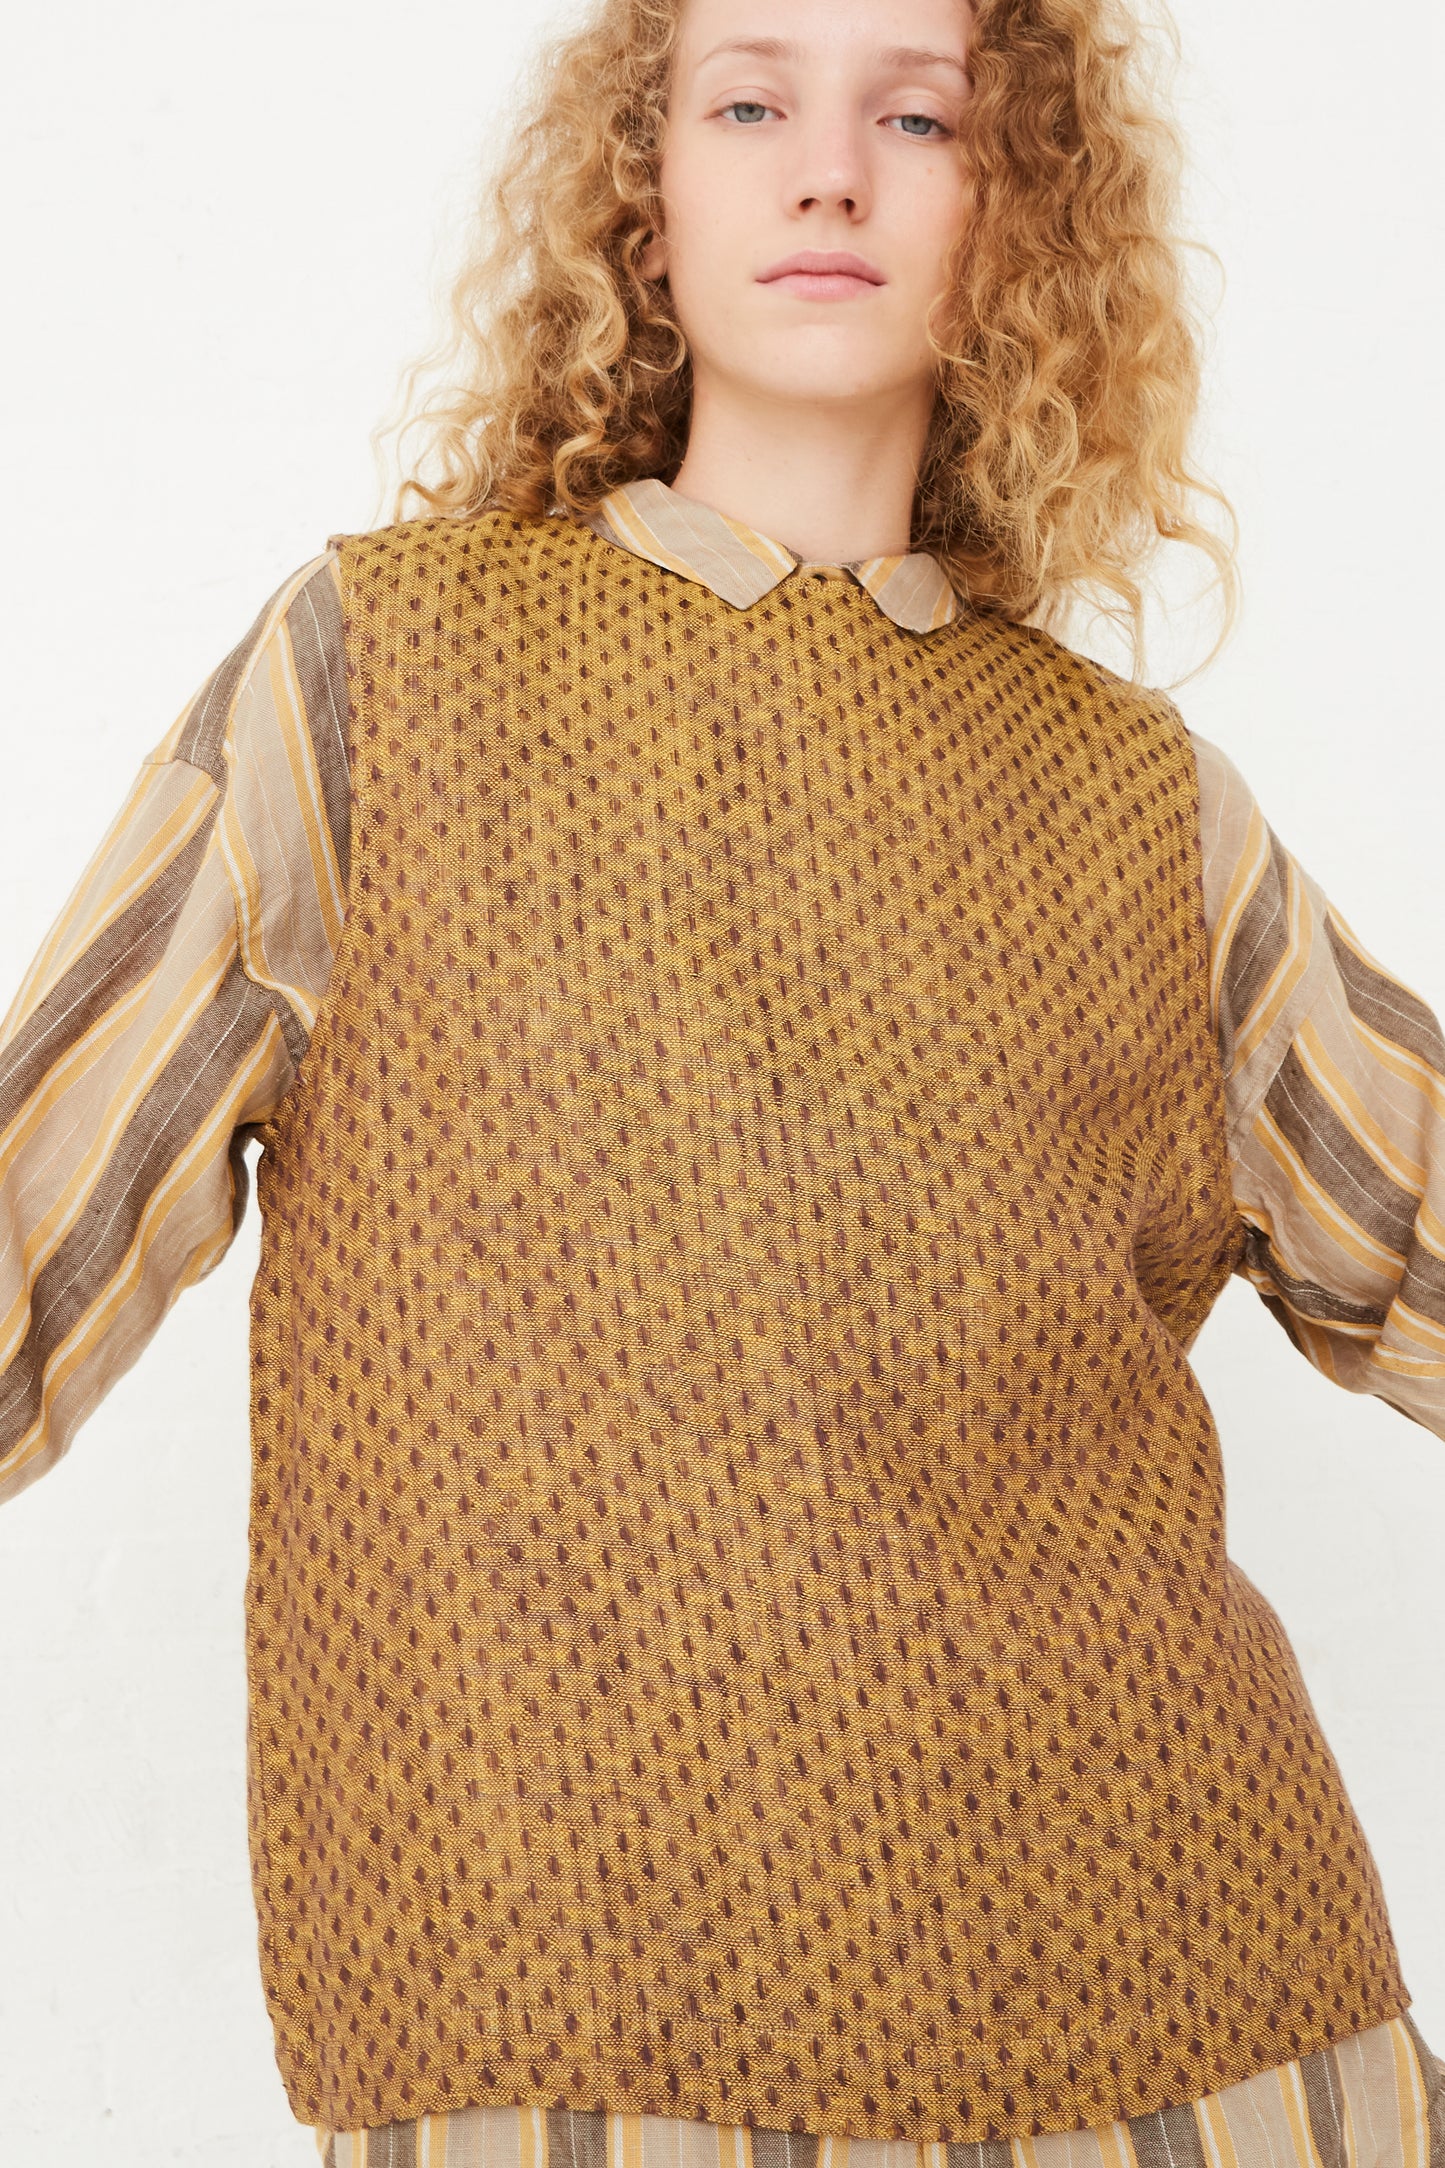 An Ichi Antiquités Linen Dobby Pullover in Camel worn by a model.